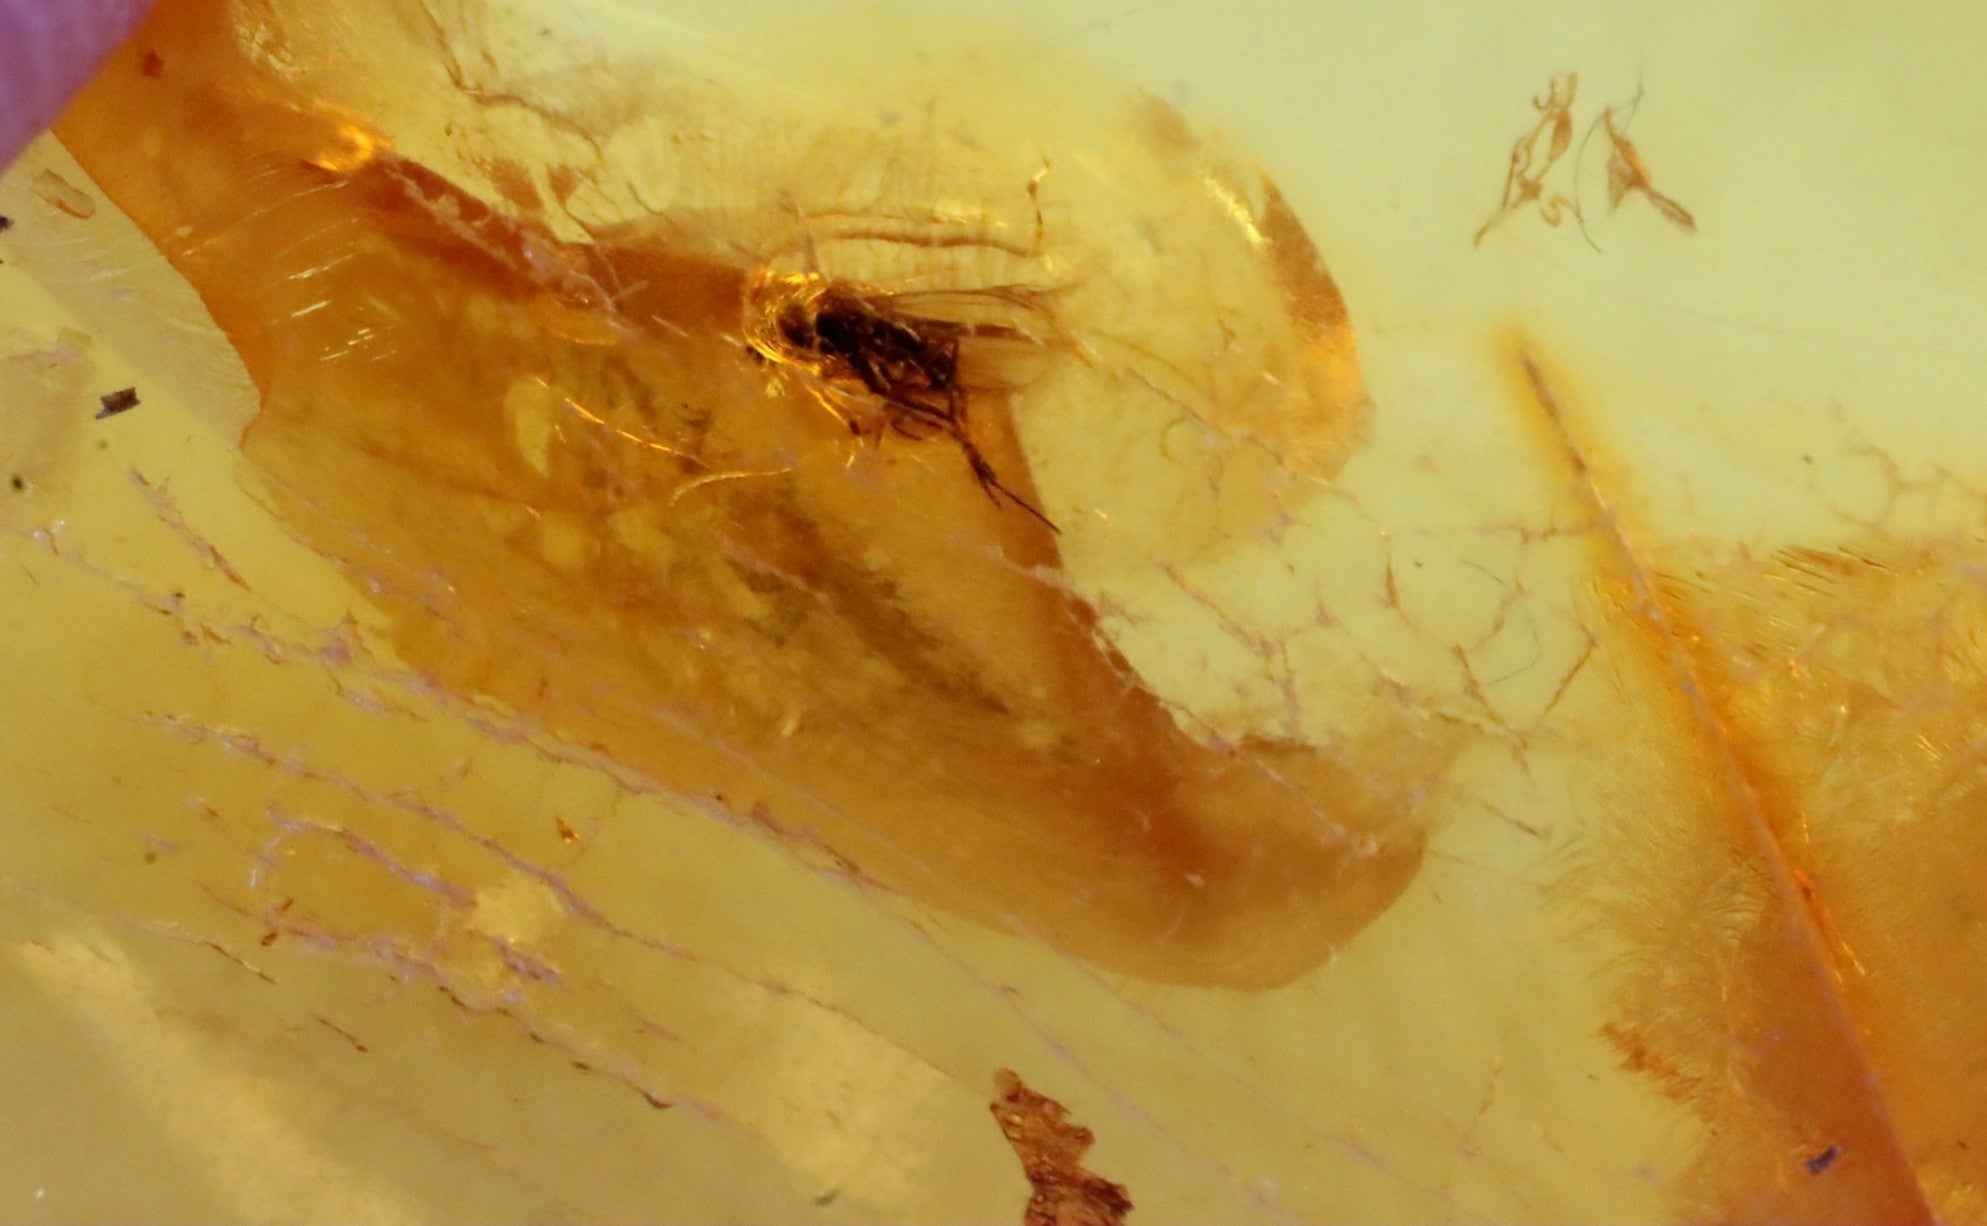 Amber Gem With Insect Inclusion